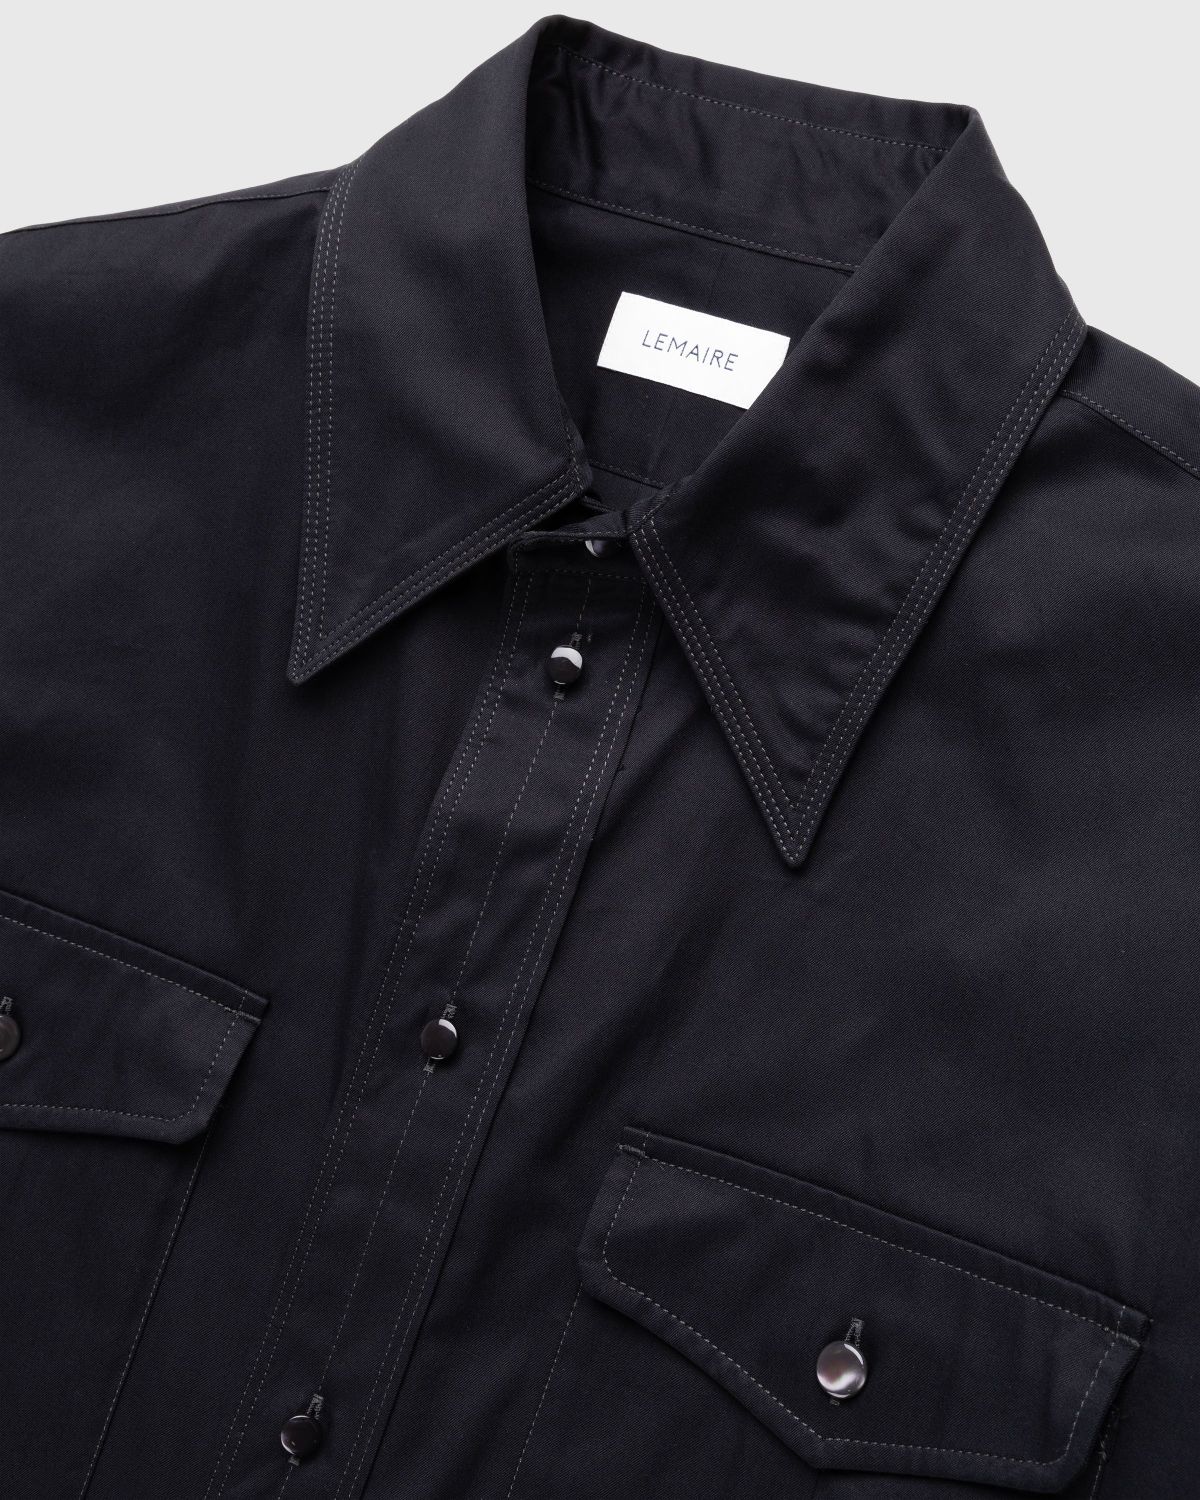 Lemaire – Relaxed Western Shirt Black   Highsnobiety Shop